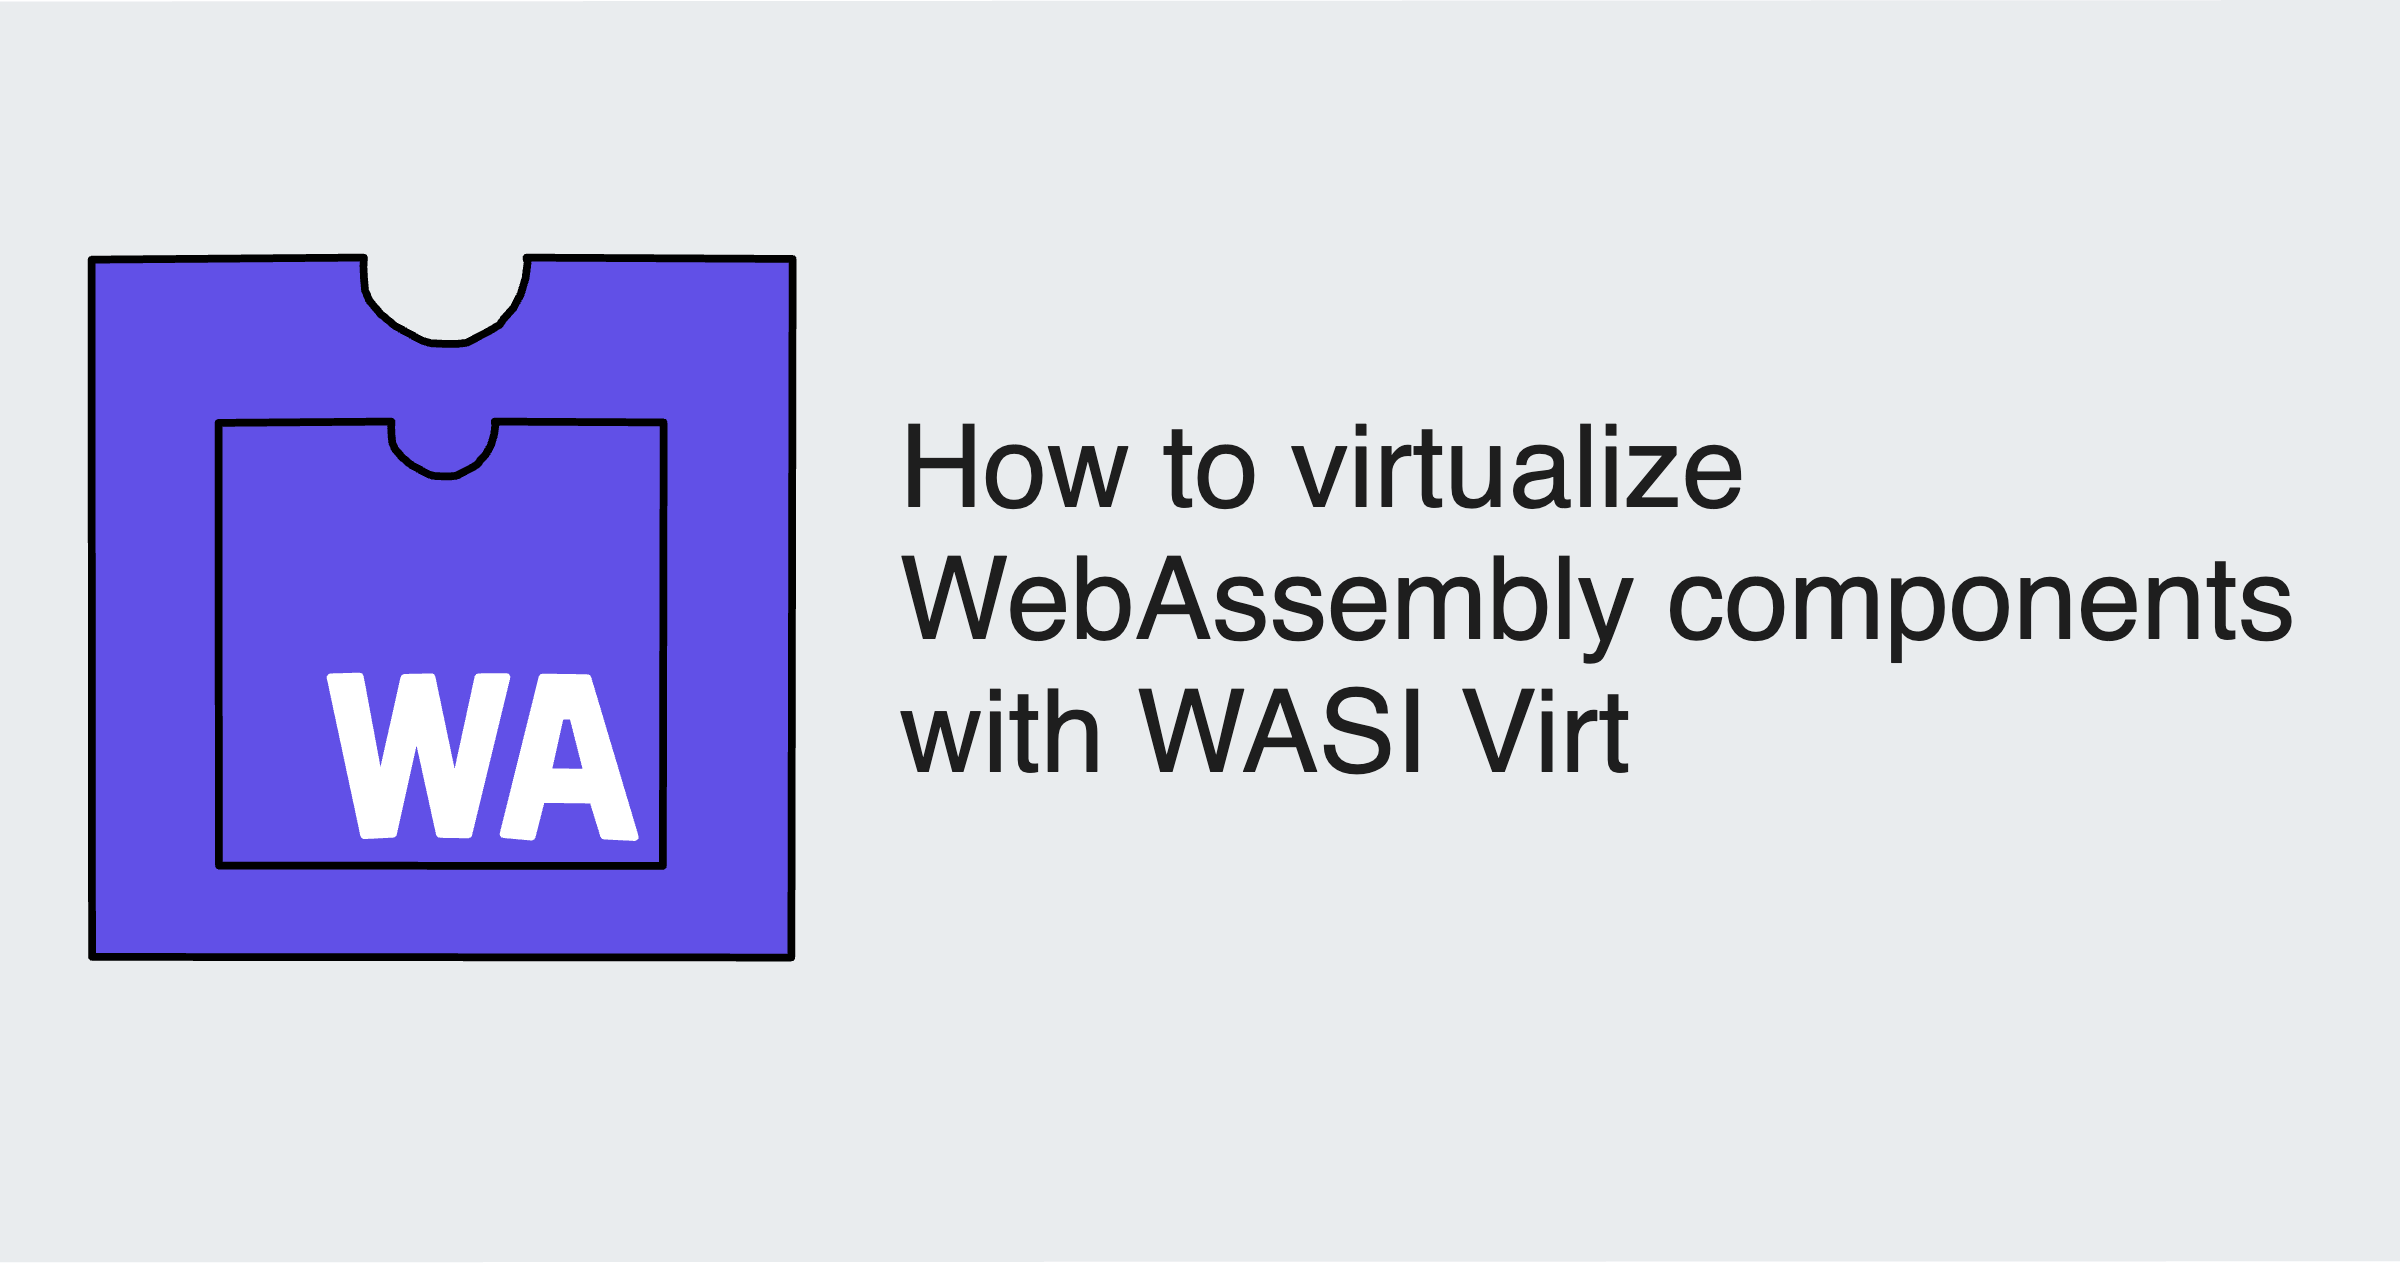 How to virtualize WebAssembly components with WASI Virt